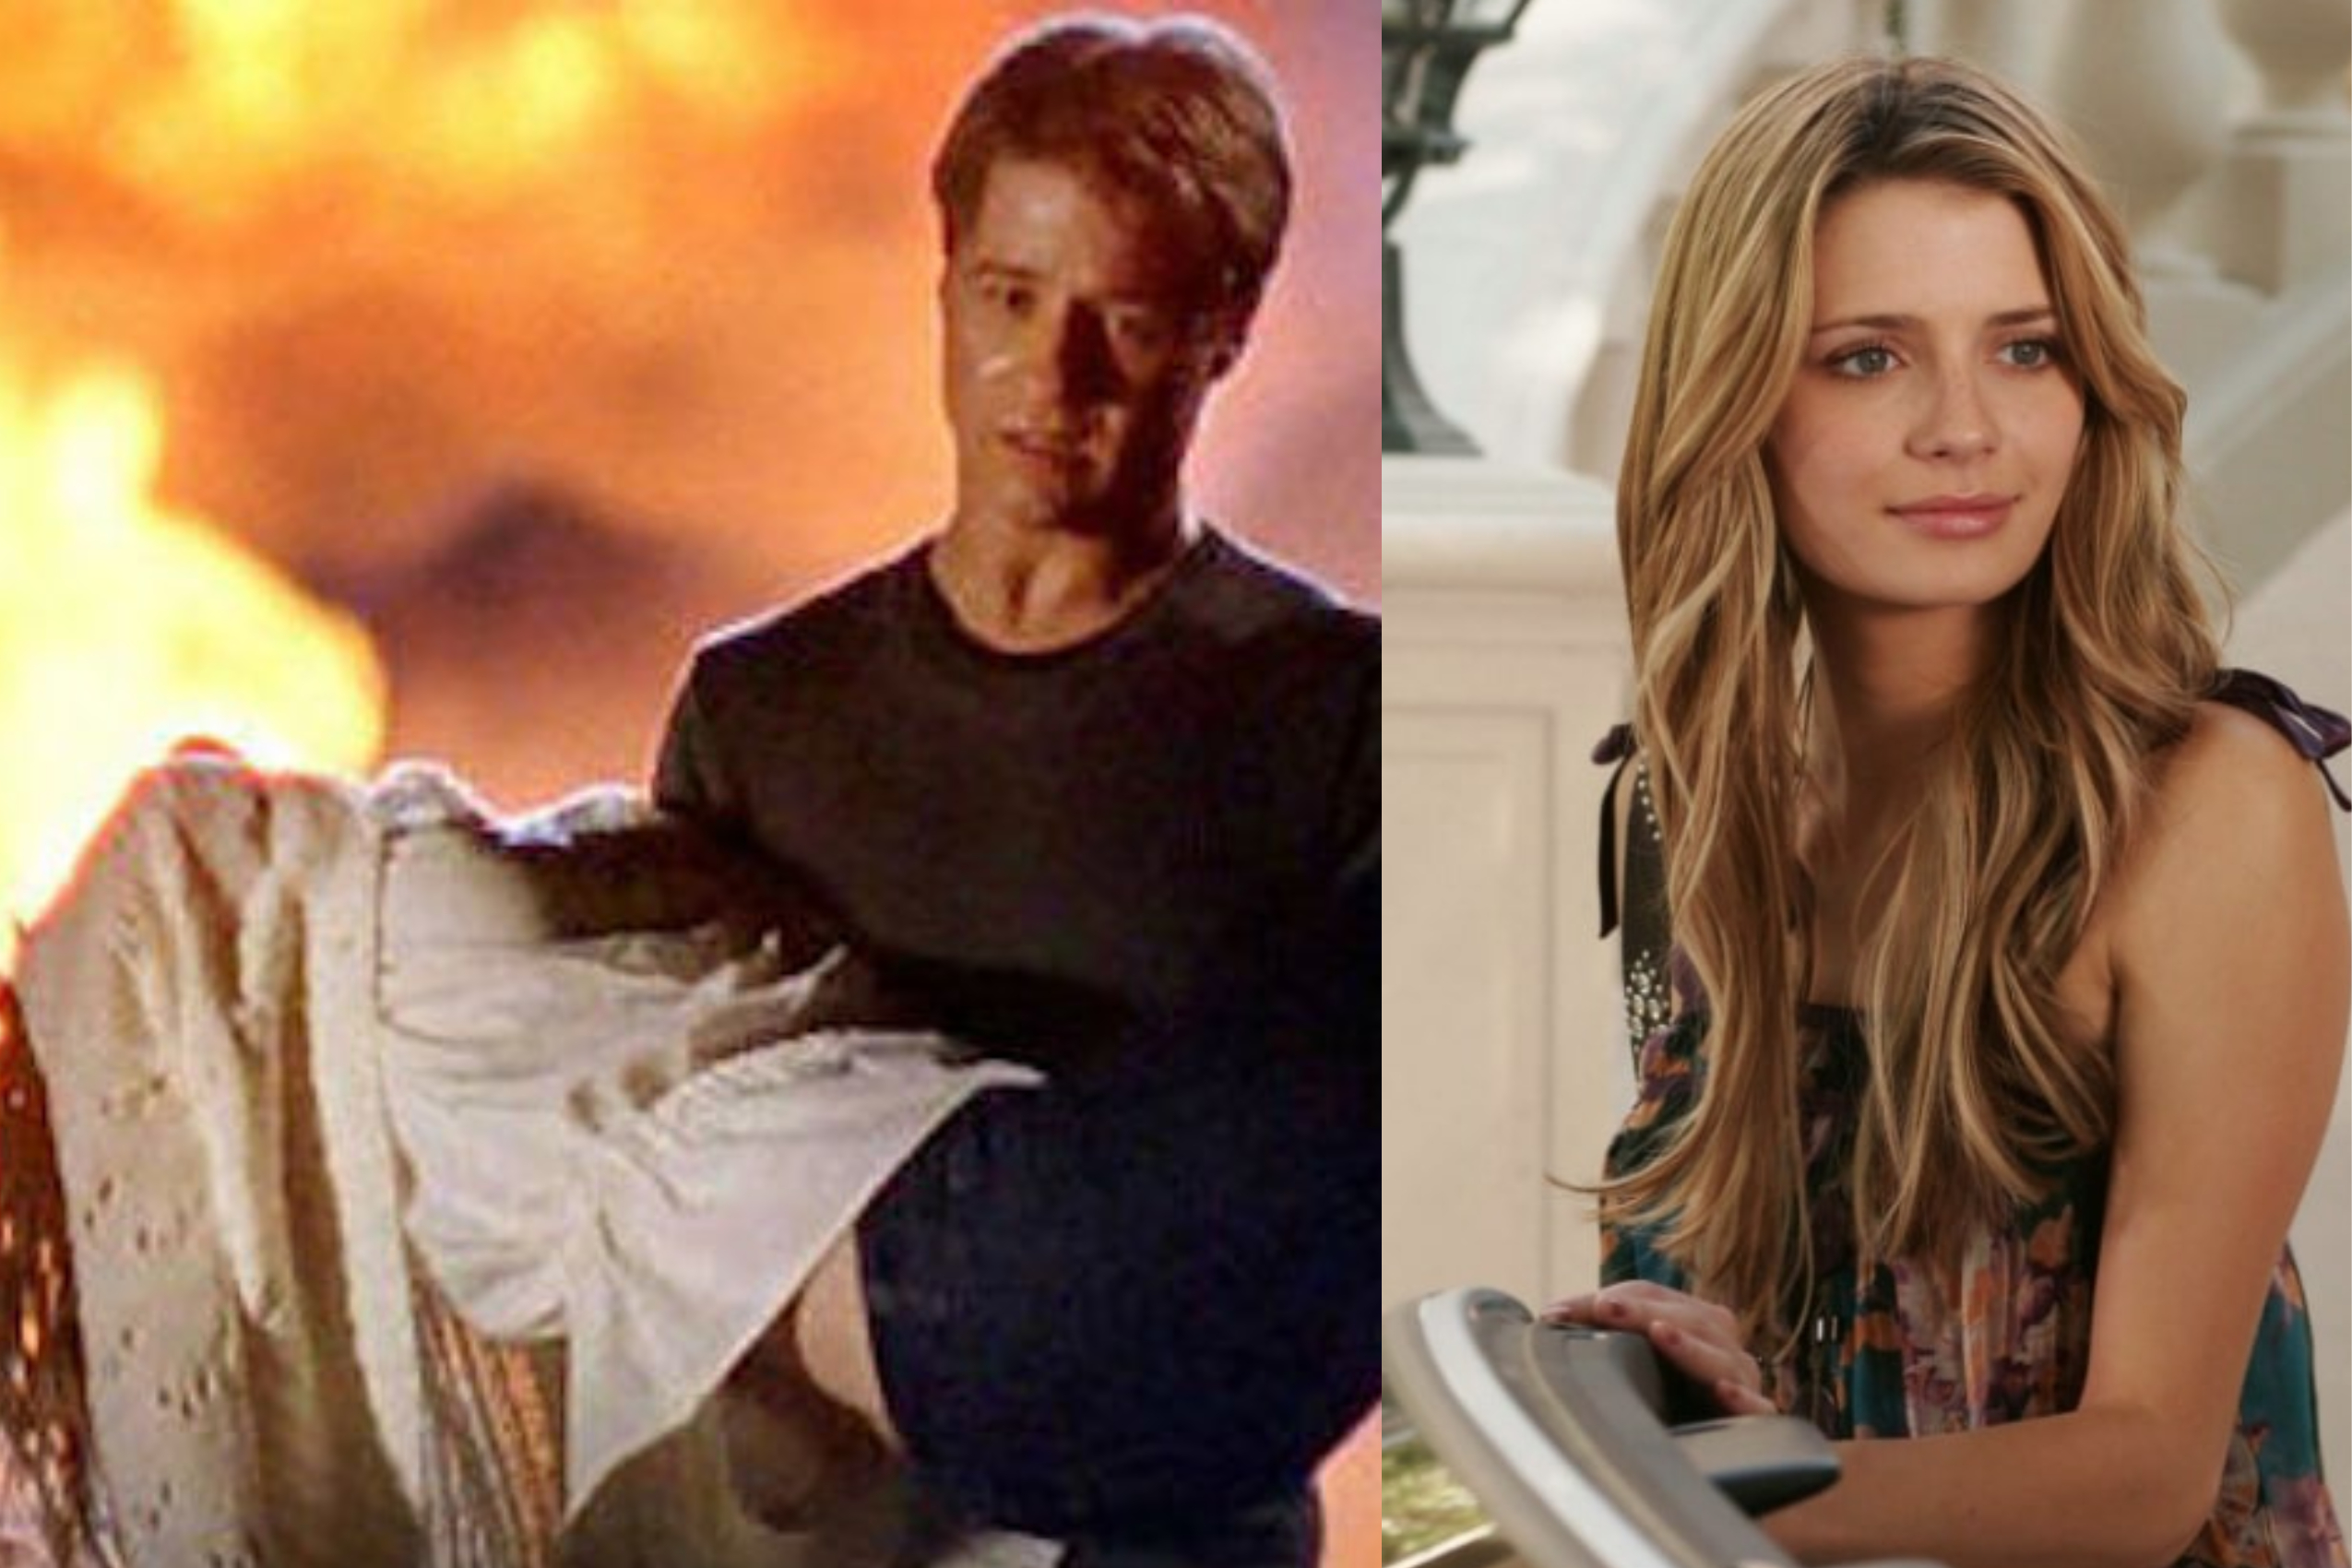 Mischa Barton Has Finally Shared The Real Reason She Left The O.C. In Such A Fiery, Dead Fashion